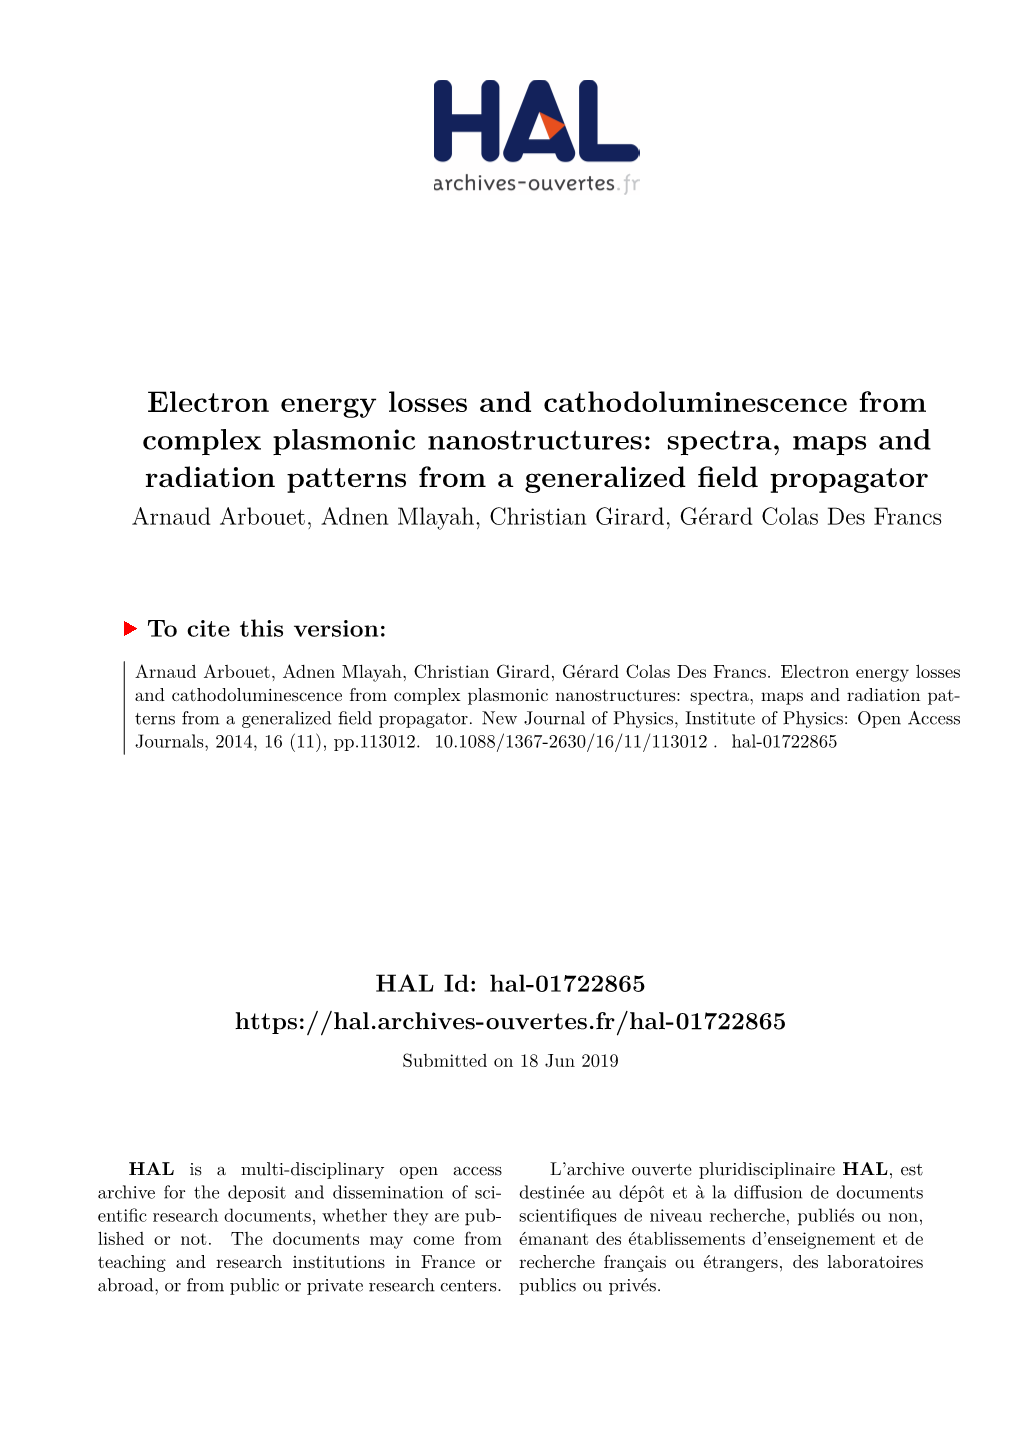 Electron Energy Losses and Cathodoluminescence from Complex Plasmonic Nanostructures: Spectra, Maps and Radiation Patterns From